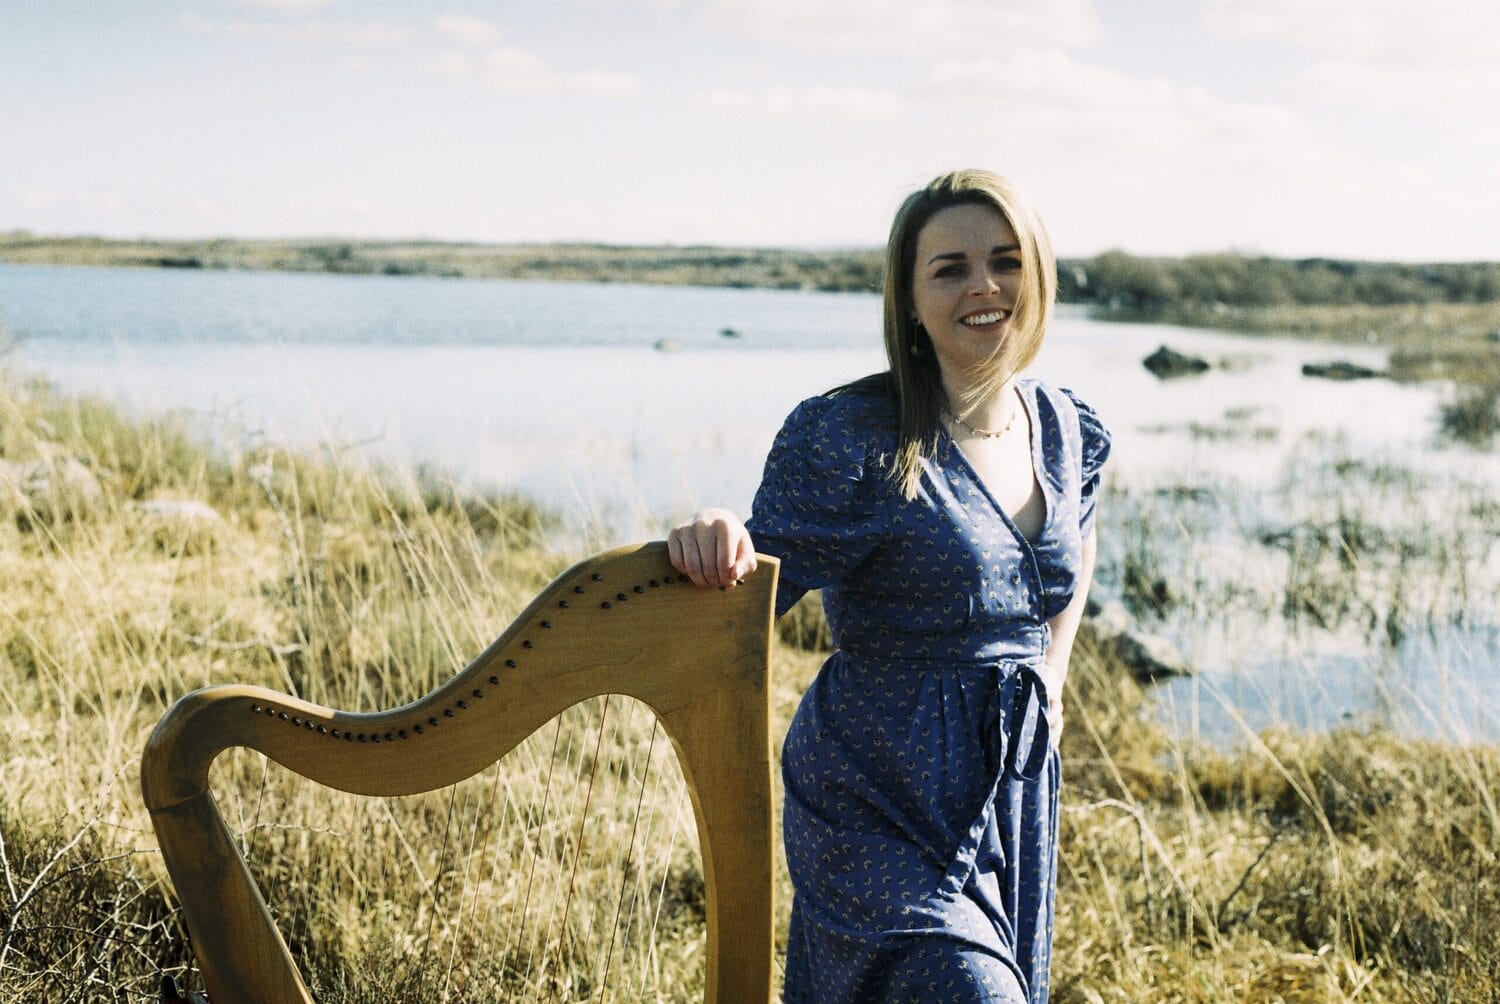 A woman is standing outside with a wooden harp beside her, a river and grass in the background.